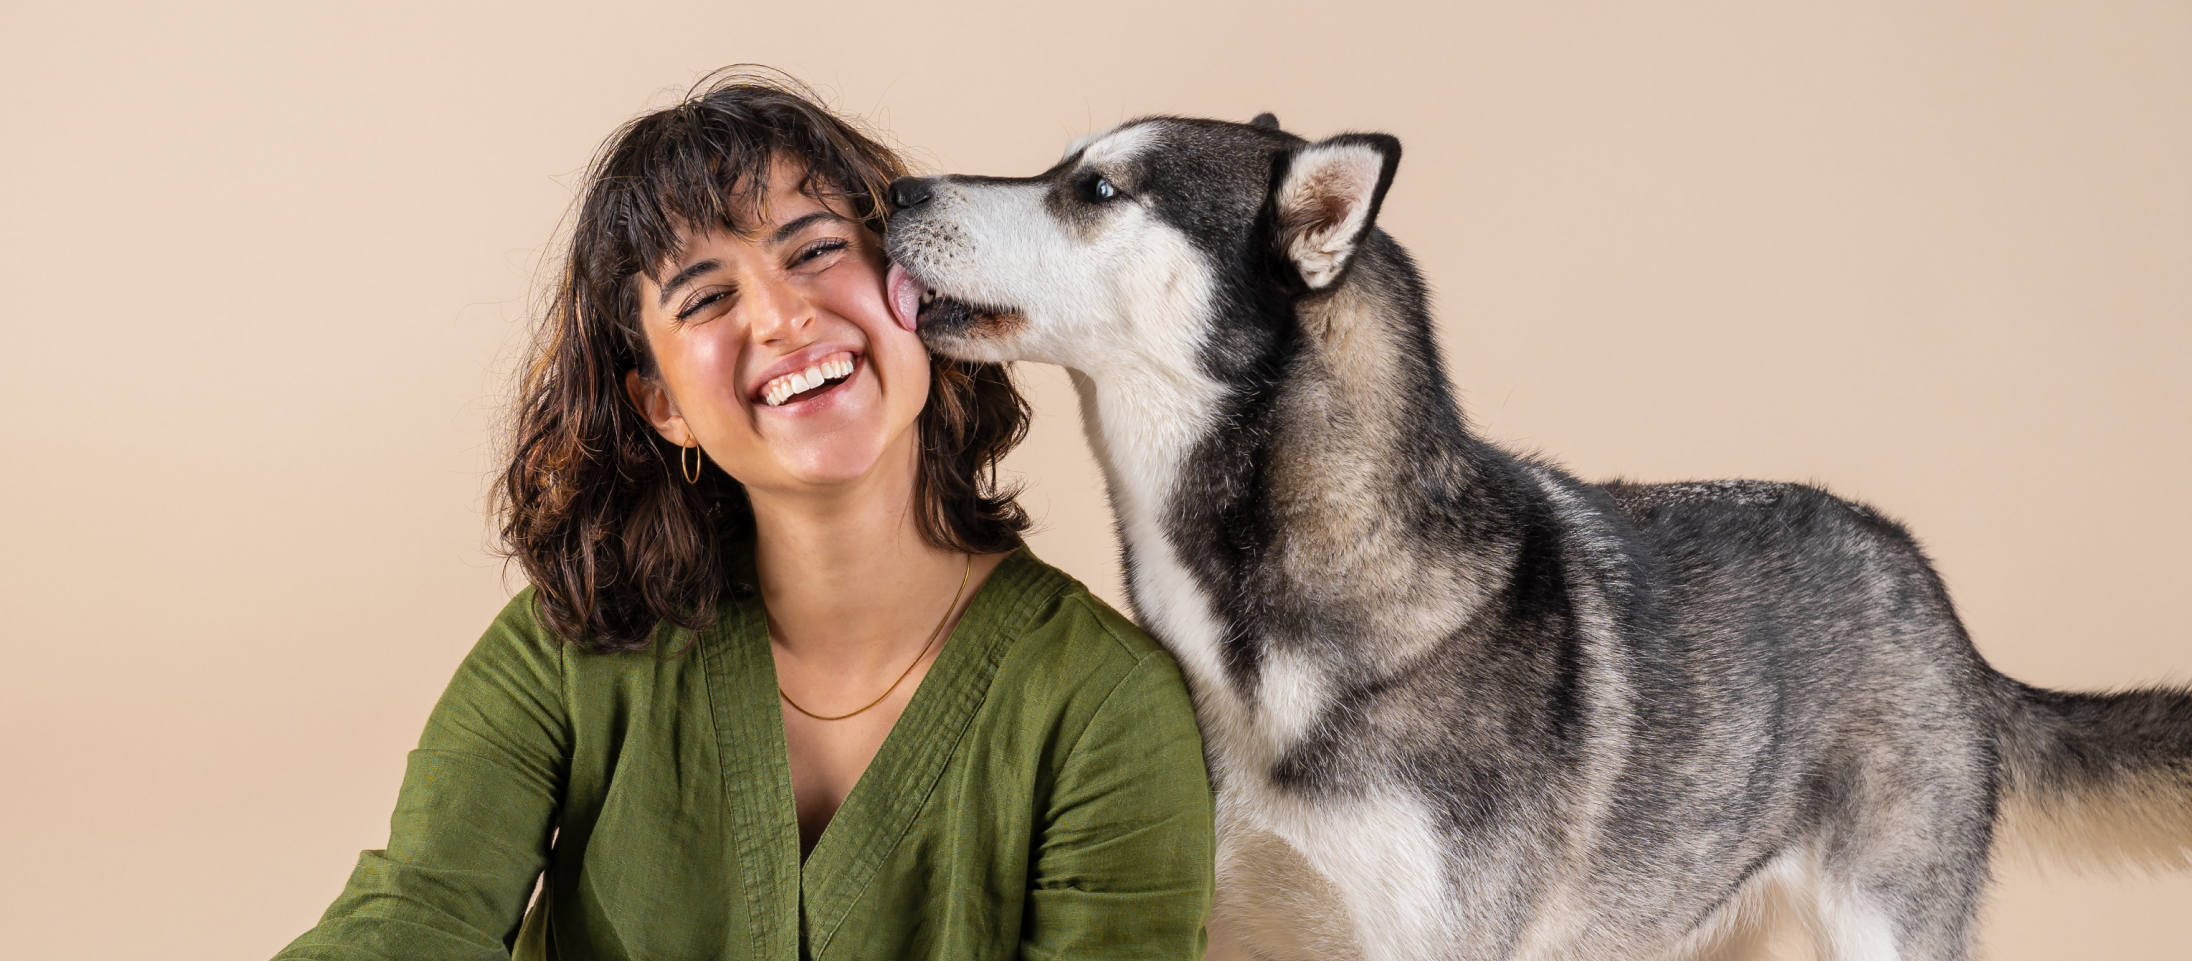 A gray husky breed dog named Sky, age 2, licking a smiling person's face